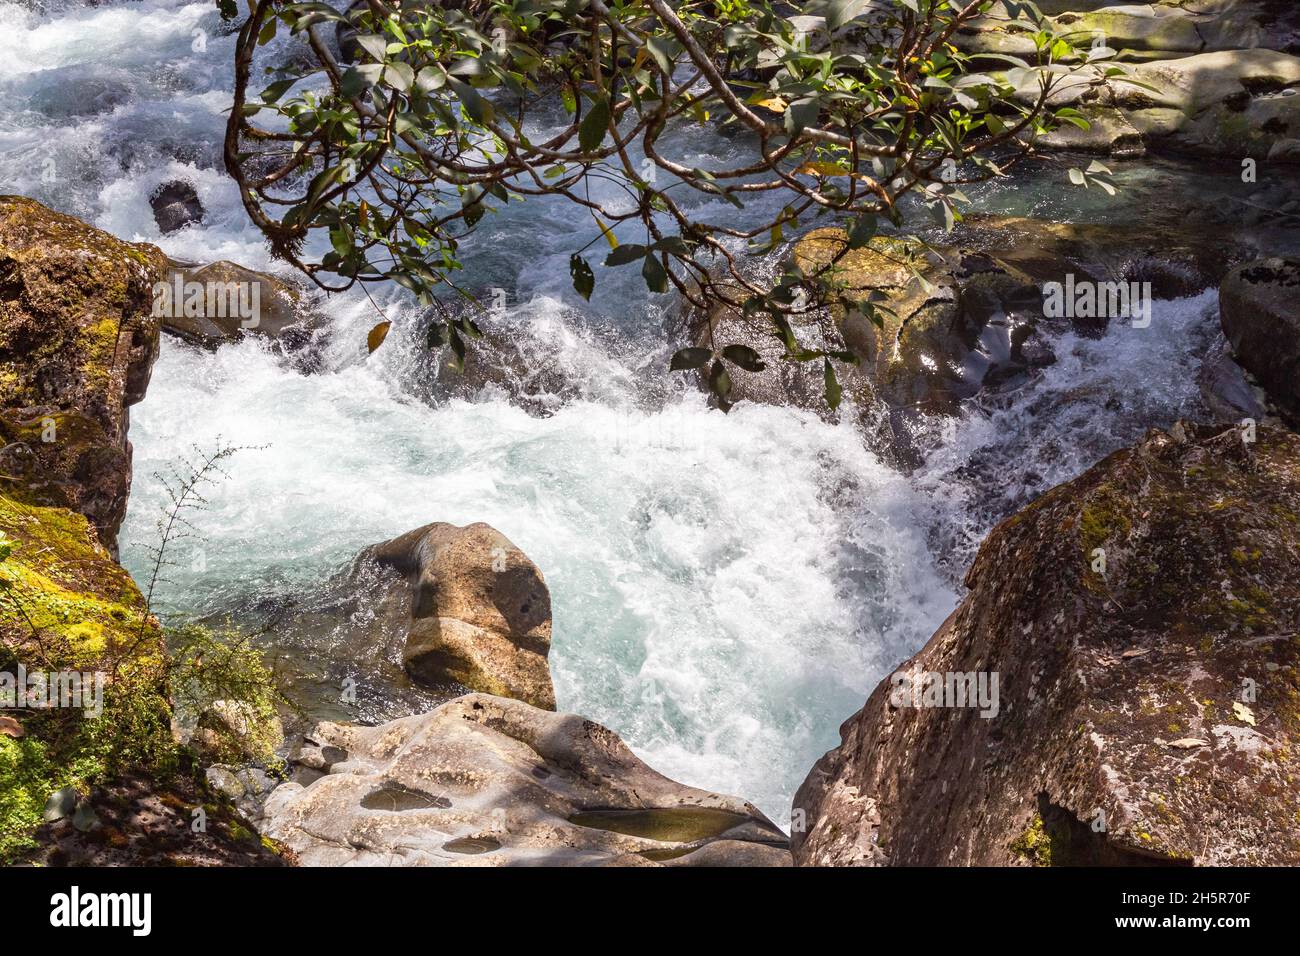 Fiordland. A stormy stream disappearing into a funnel. Funnel Chasm. Stream among stones. New Zealand. Stock Photo